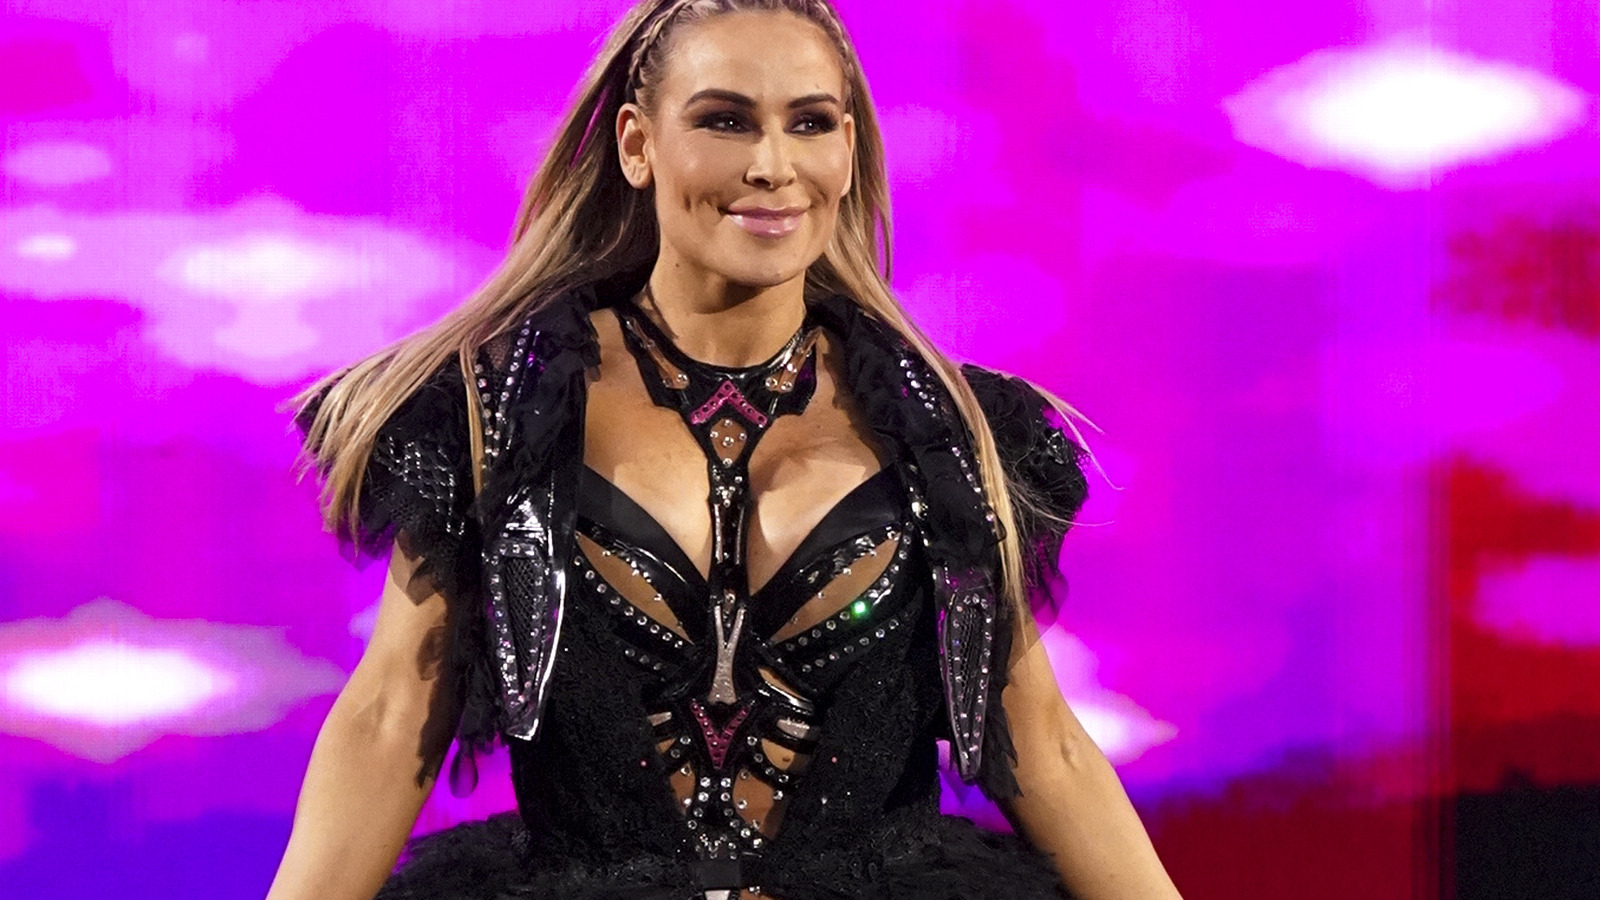 Backstage Update On WWE Star Natalya's Contract